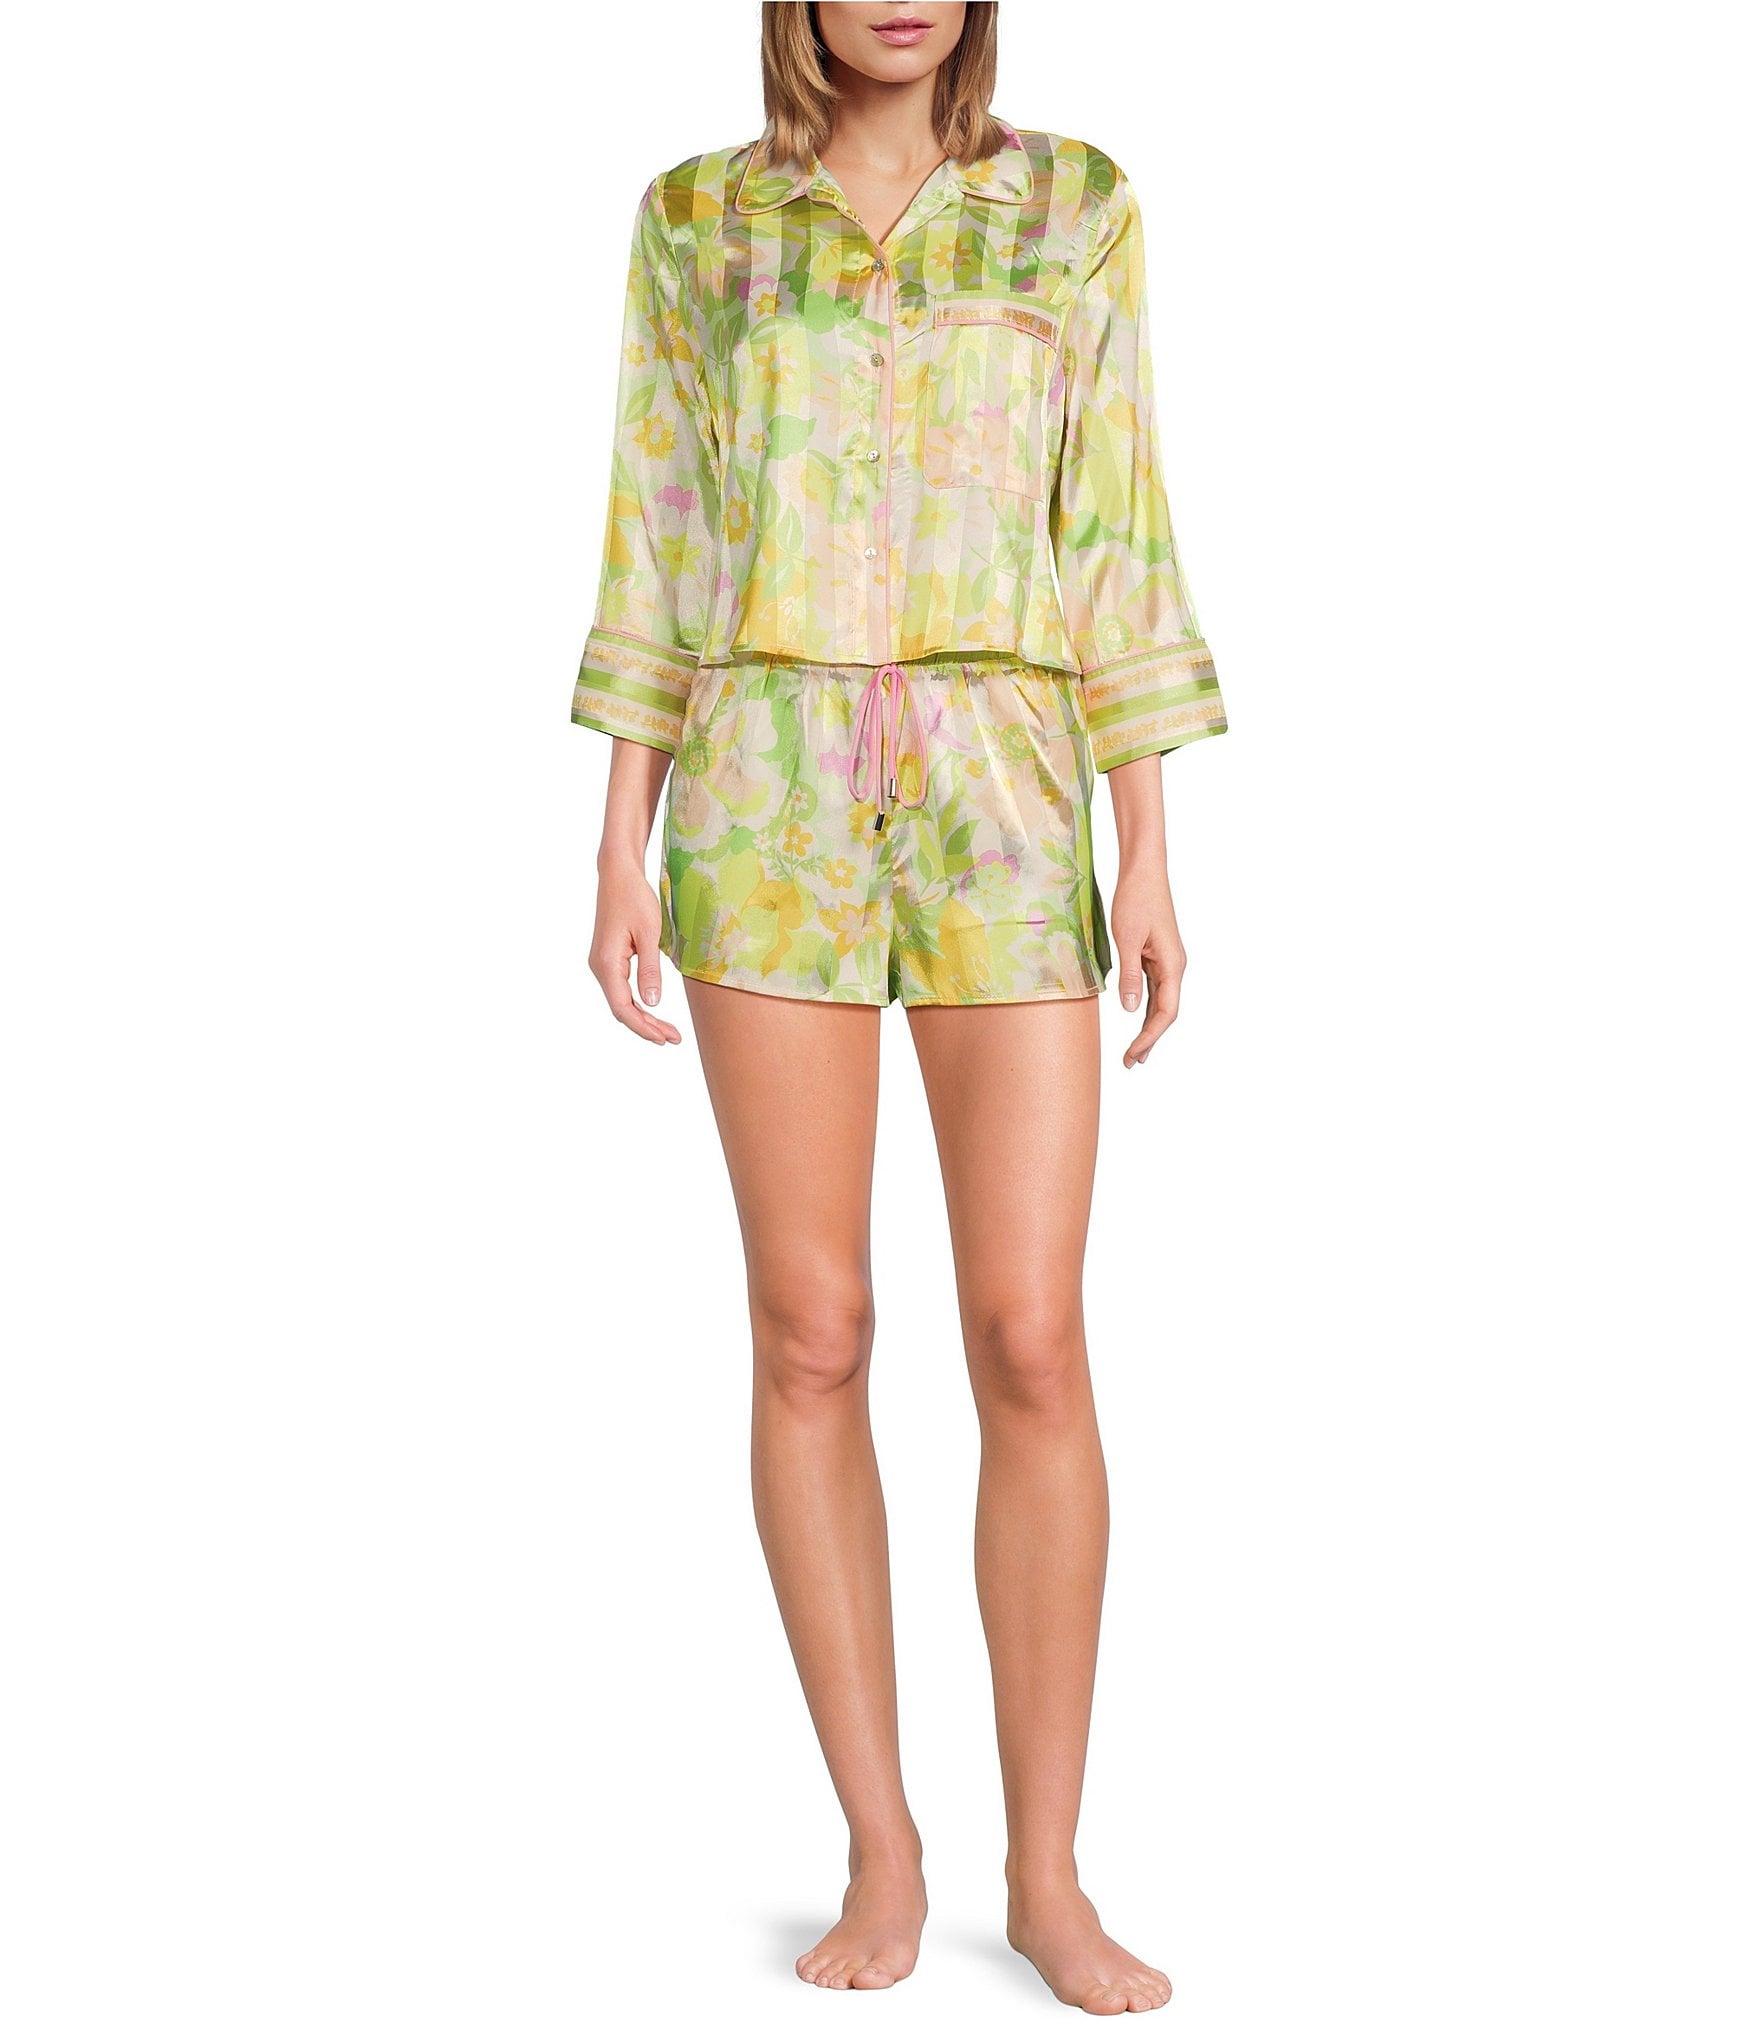 https://dimg.dillards.com/is/image/DillardsZoom/zoom/free-people-pillow-talk-floral-printed-button-front-satin-pajama-set/00000000_zi_e6a61cf6-adf3-4374-a73c-6103aa12ae2d.jpg